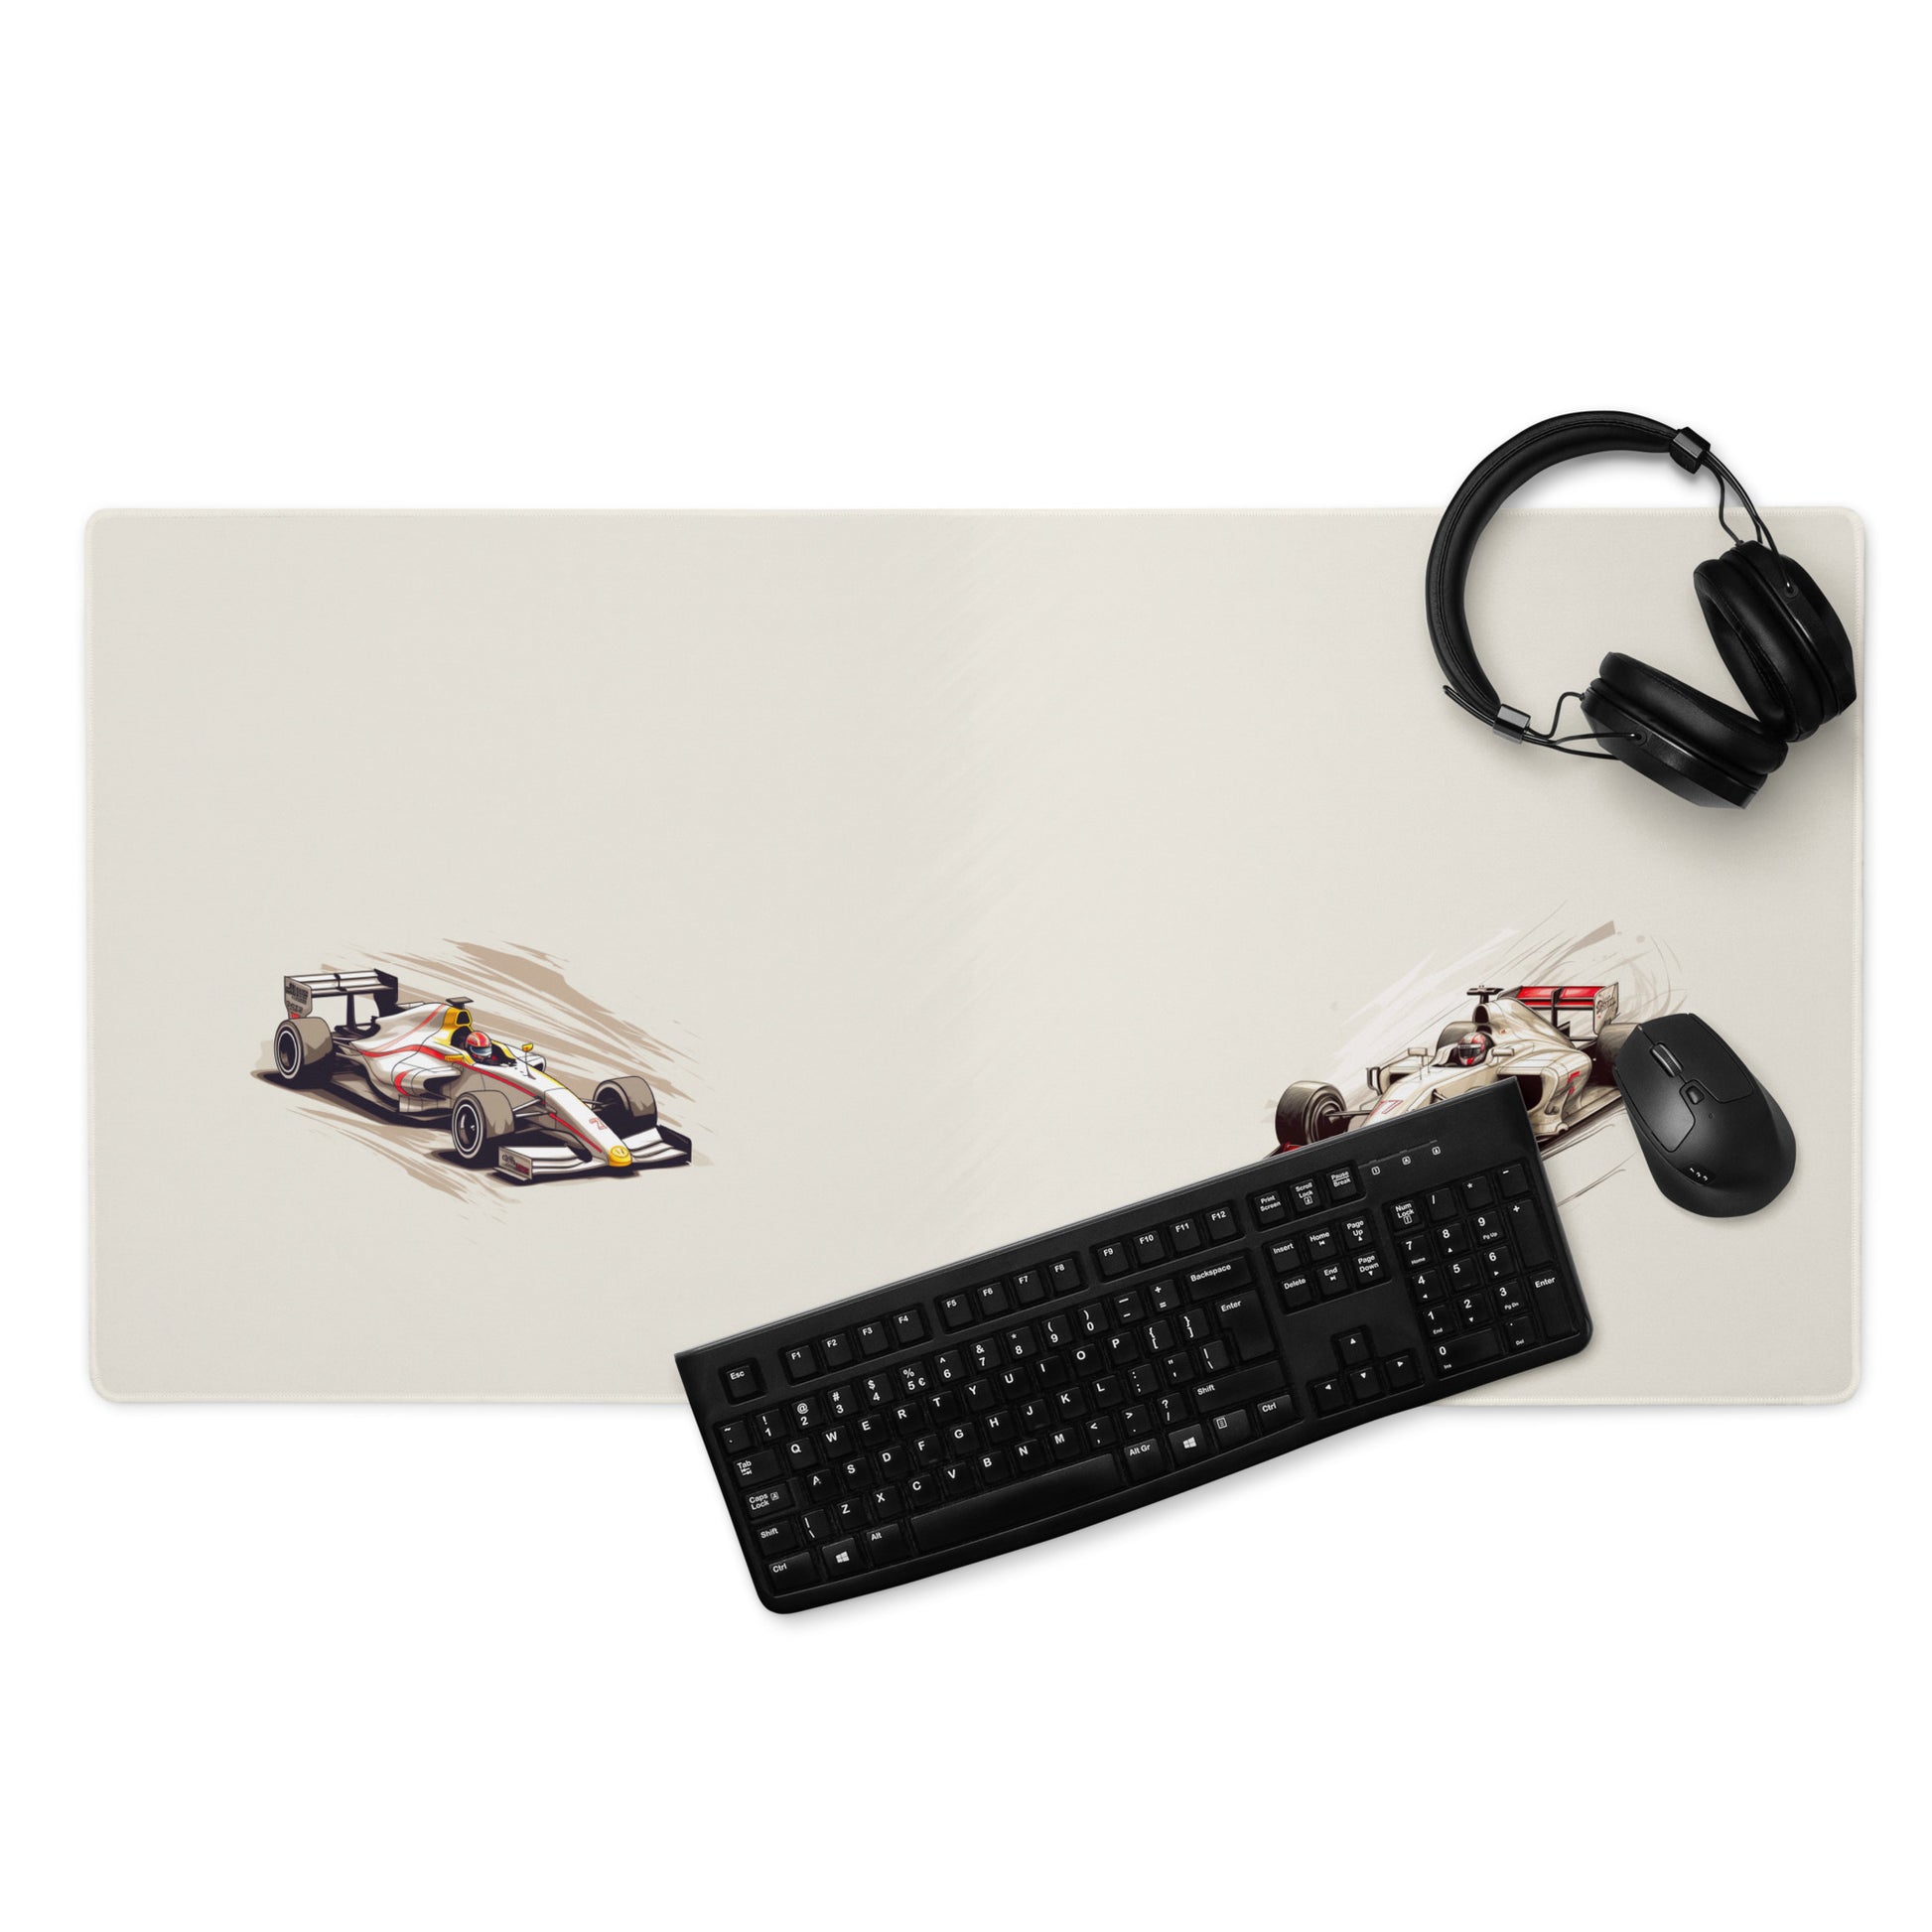 A 36" x 18" desk pad with two fast formula one cars on the sides displayed with headphone, a keyboard and a mouse on it. Beige in color.